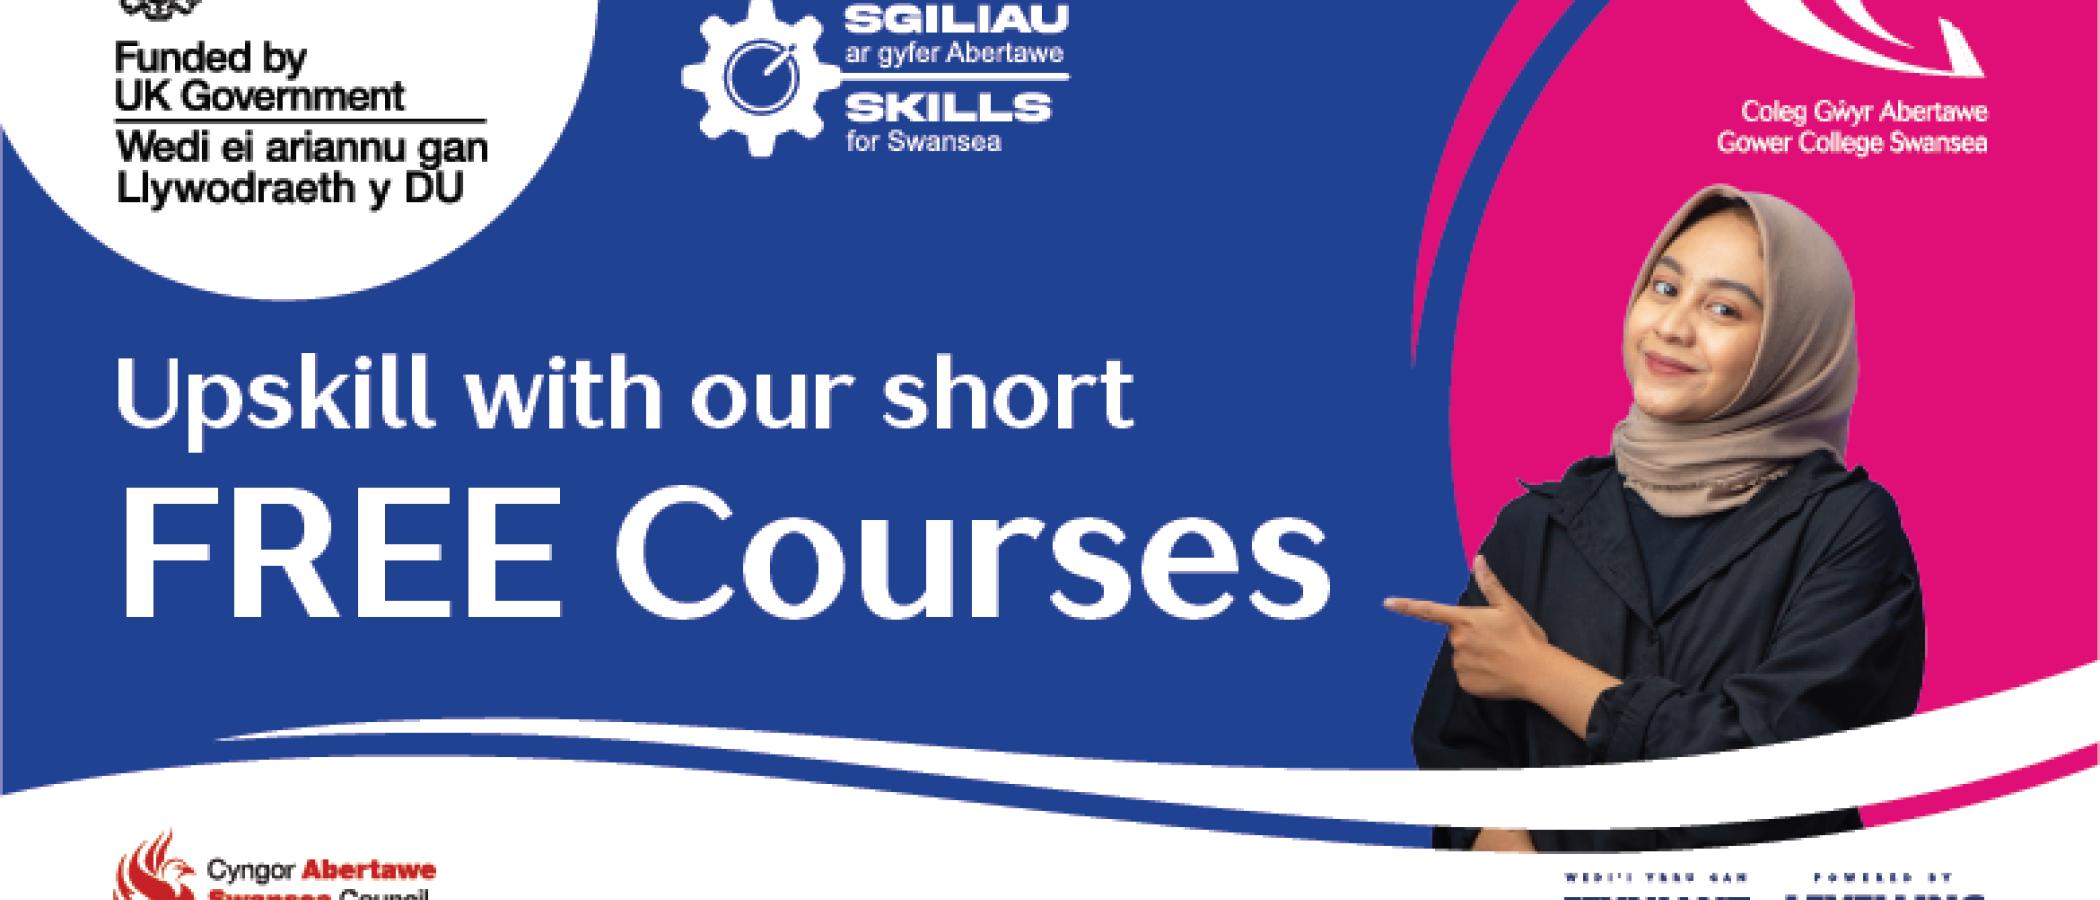 Promotional image - Upskill with our short FREE Courses